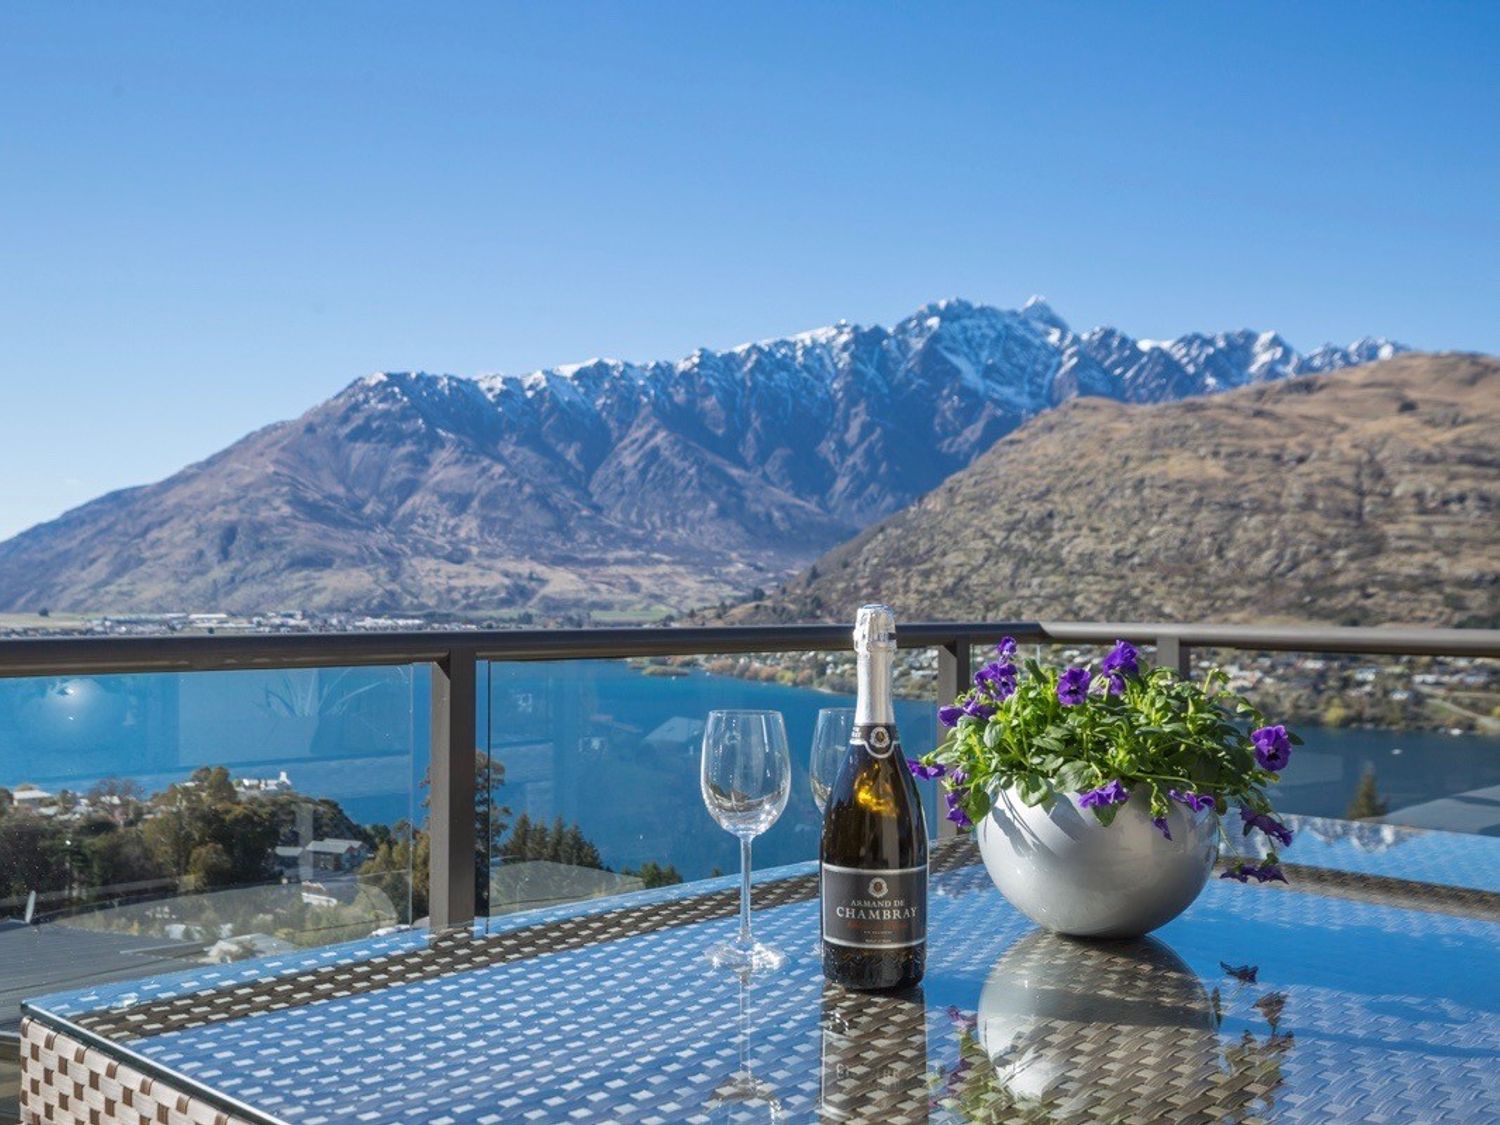 Grand View Queenstown - Queenstown Holiday Home -  - 1031600 - photo 1